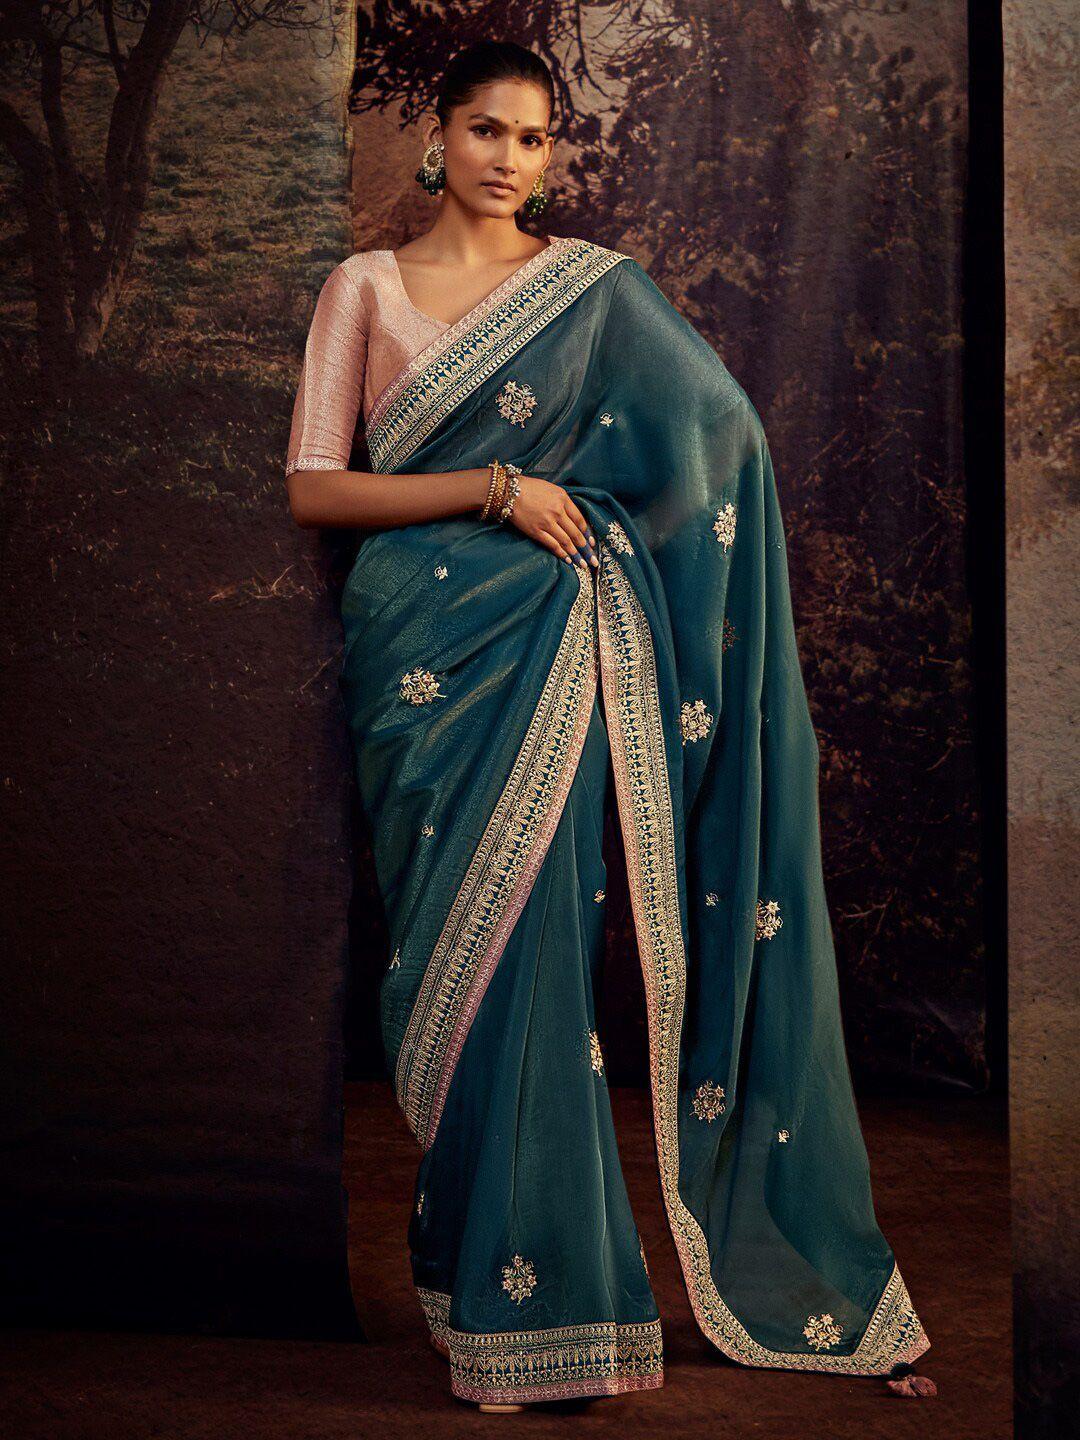 mitera-teal-&-gold-toned-ethnic-motifs-embroidered-tissue-saree